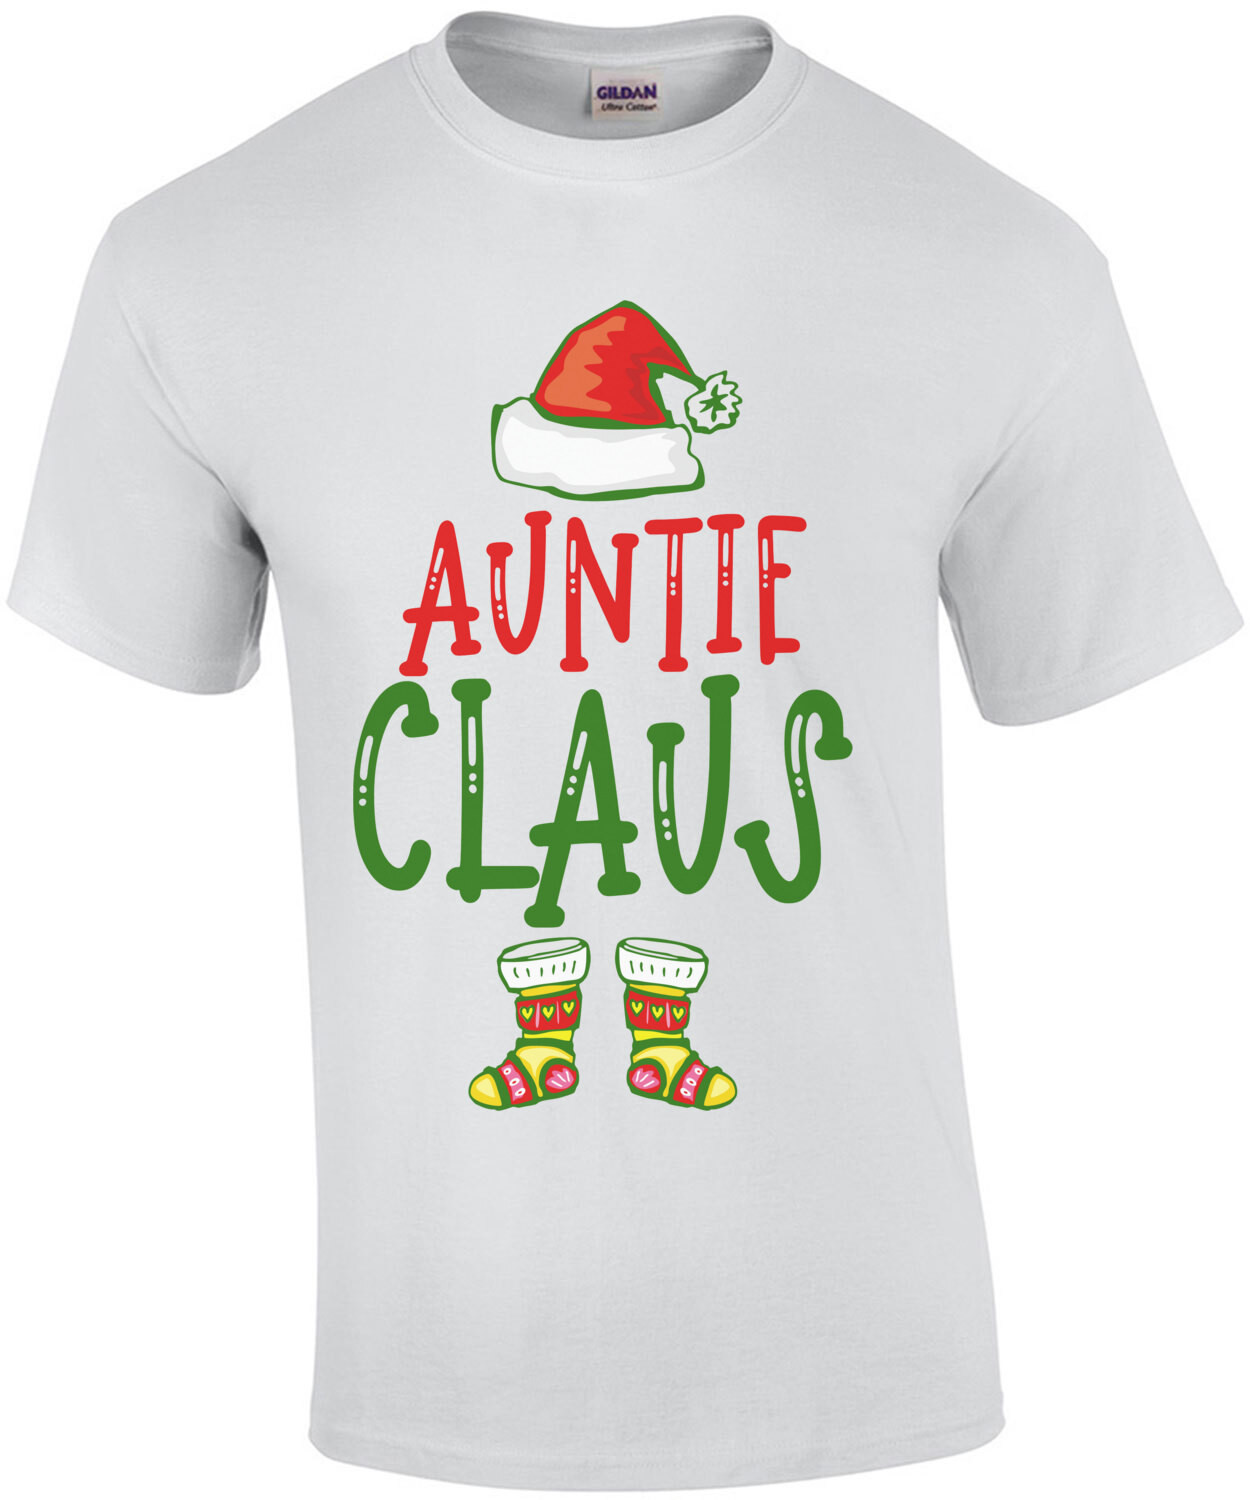 Auntie Claus - Funny Aunt Christmas T-Shirt